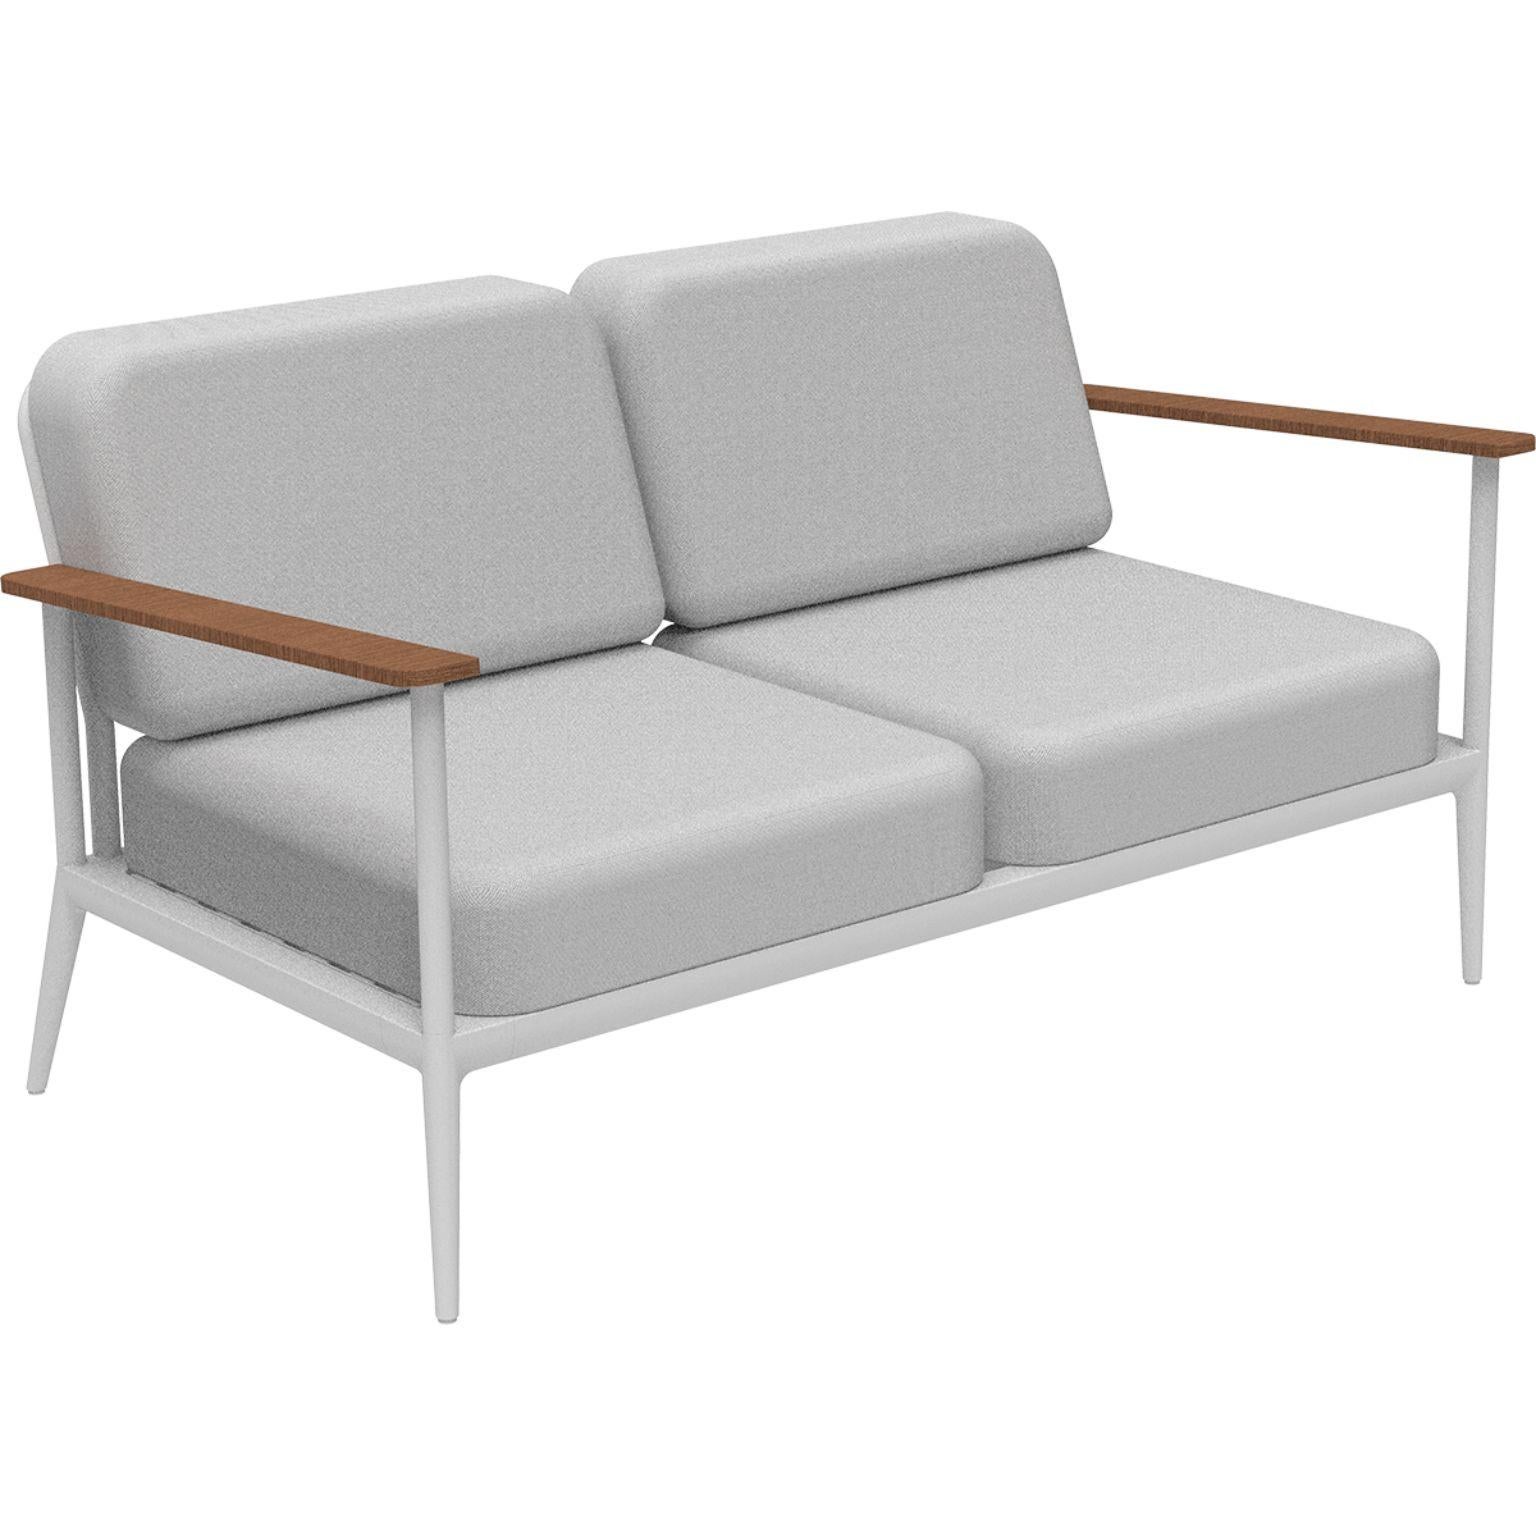 Nature white sofa by MOWEE.
Dimensions: D85 x W151 x H81 cm (seat height 42 cm).
Material: aluminum, upholstery and Iroko Wood.
Weight: 32 kg.
Also available in different colors and finishes. 

An unmistakable collection for its beauty and